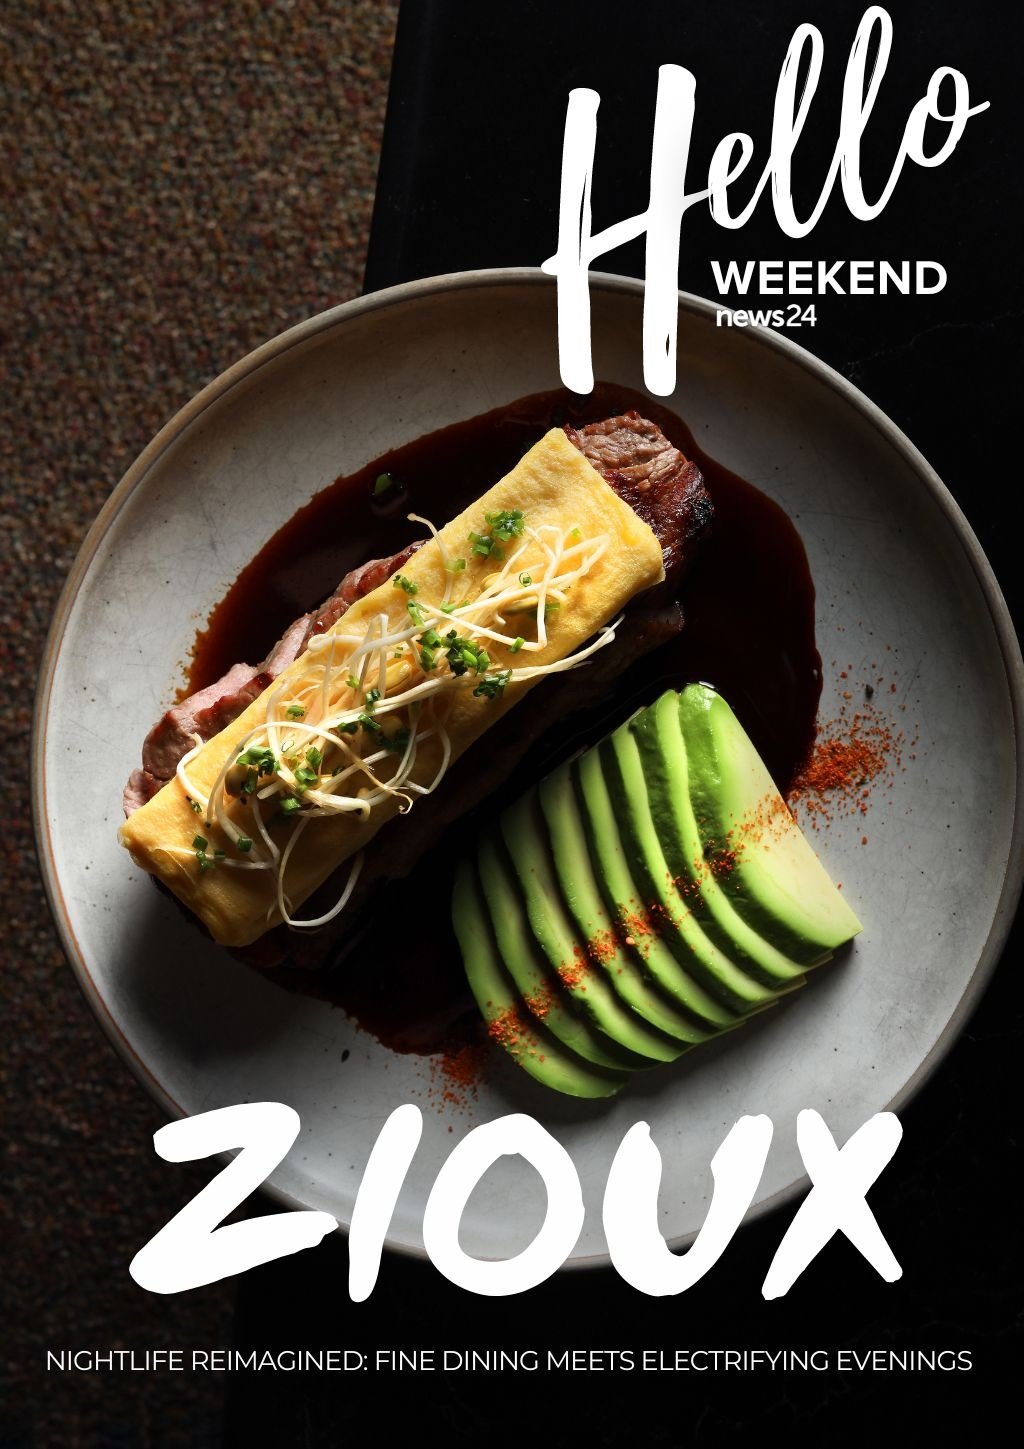 News24 | HELLO WEEKEND | Nightlife reimagined: Fine dining meets electrifying evenings at Zioux